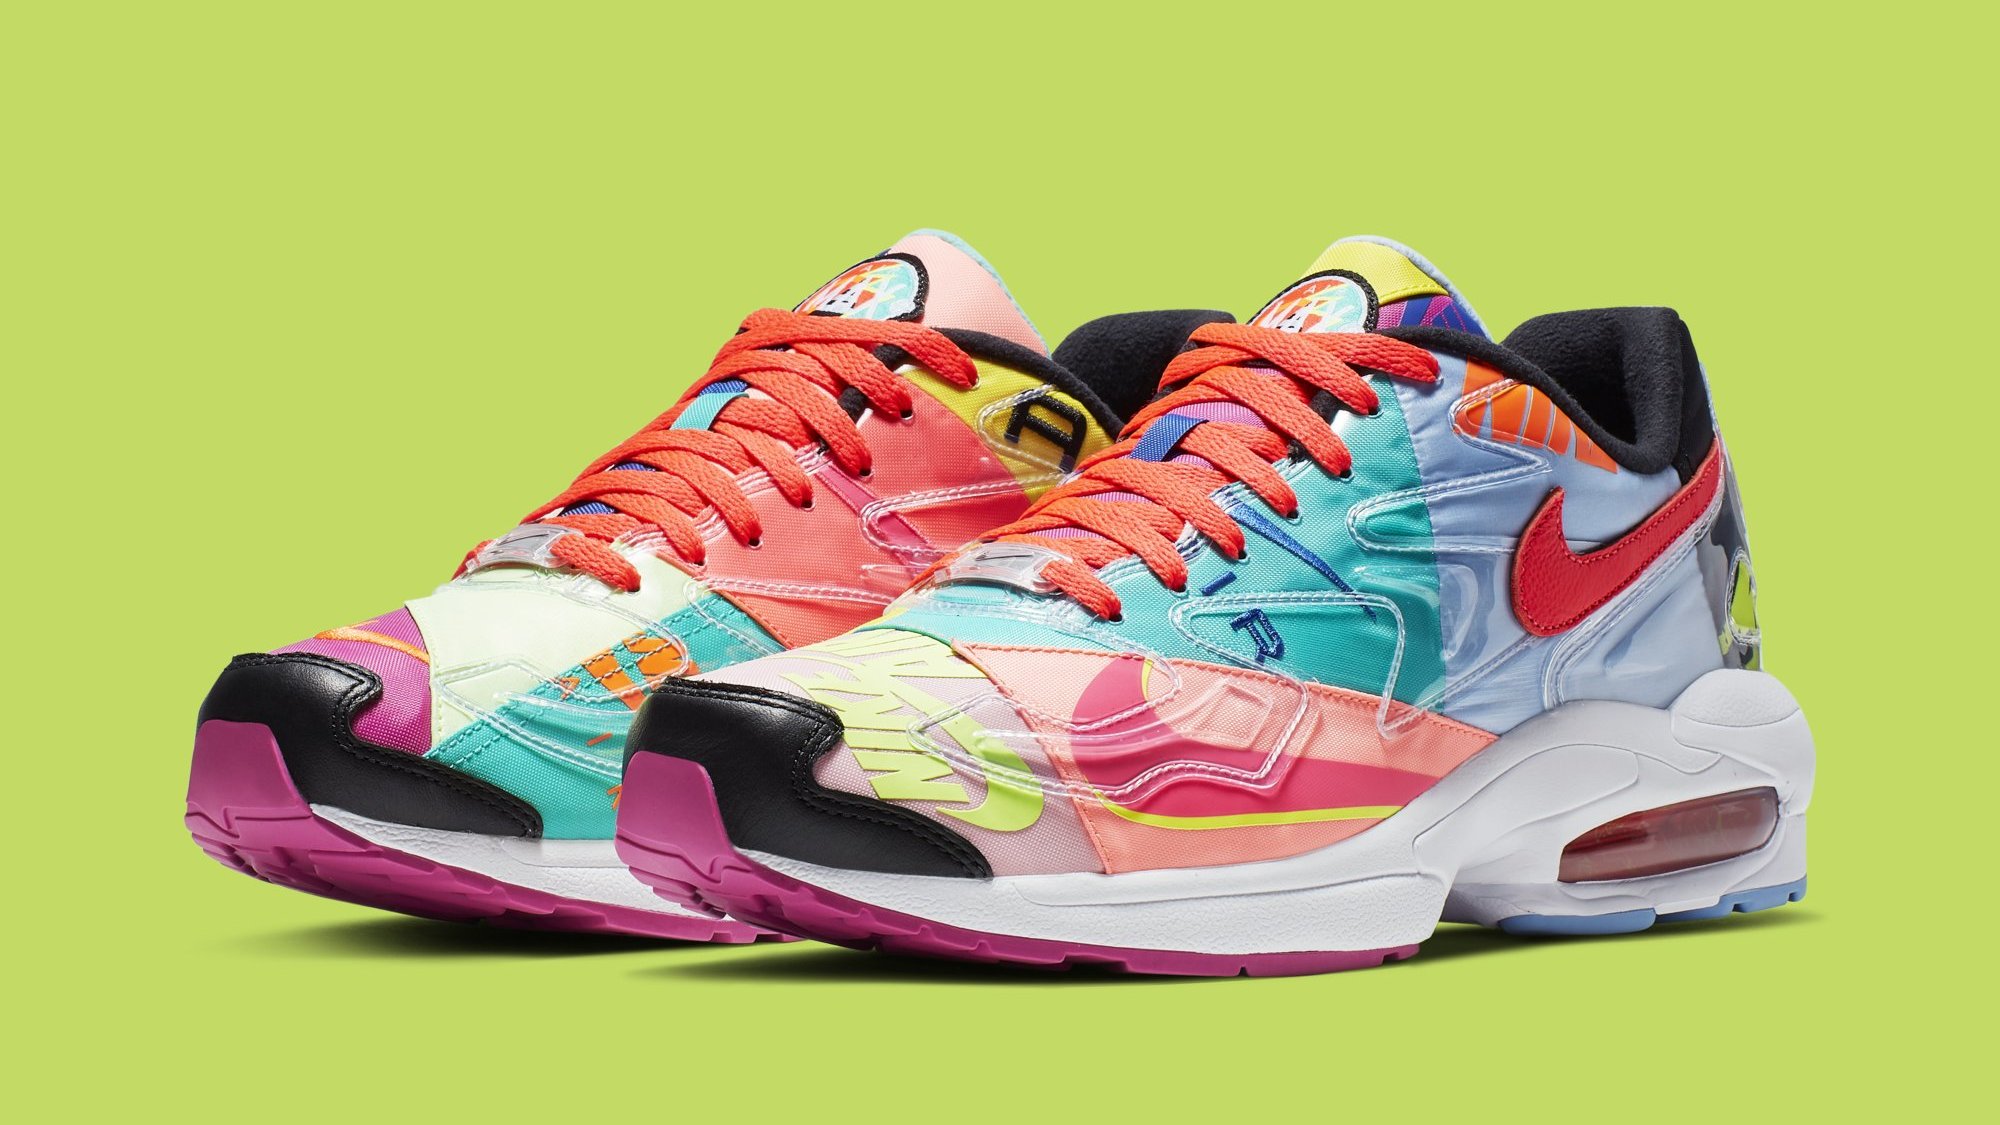 Atmos x Air Max2 Light Air Max Day 2019 Release Date | Sole Collector